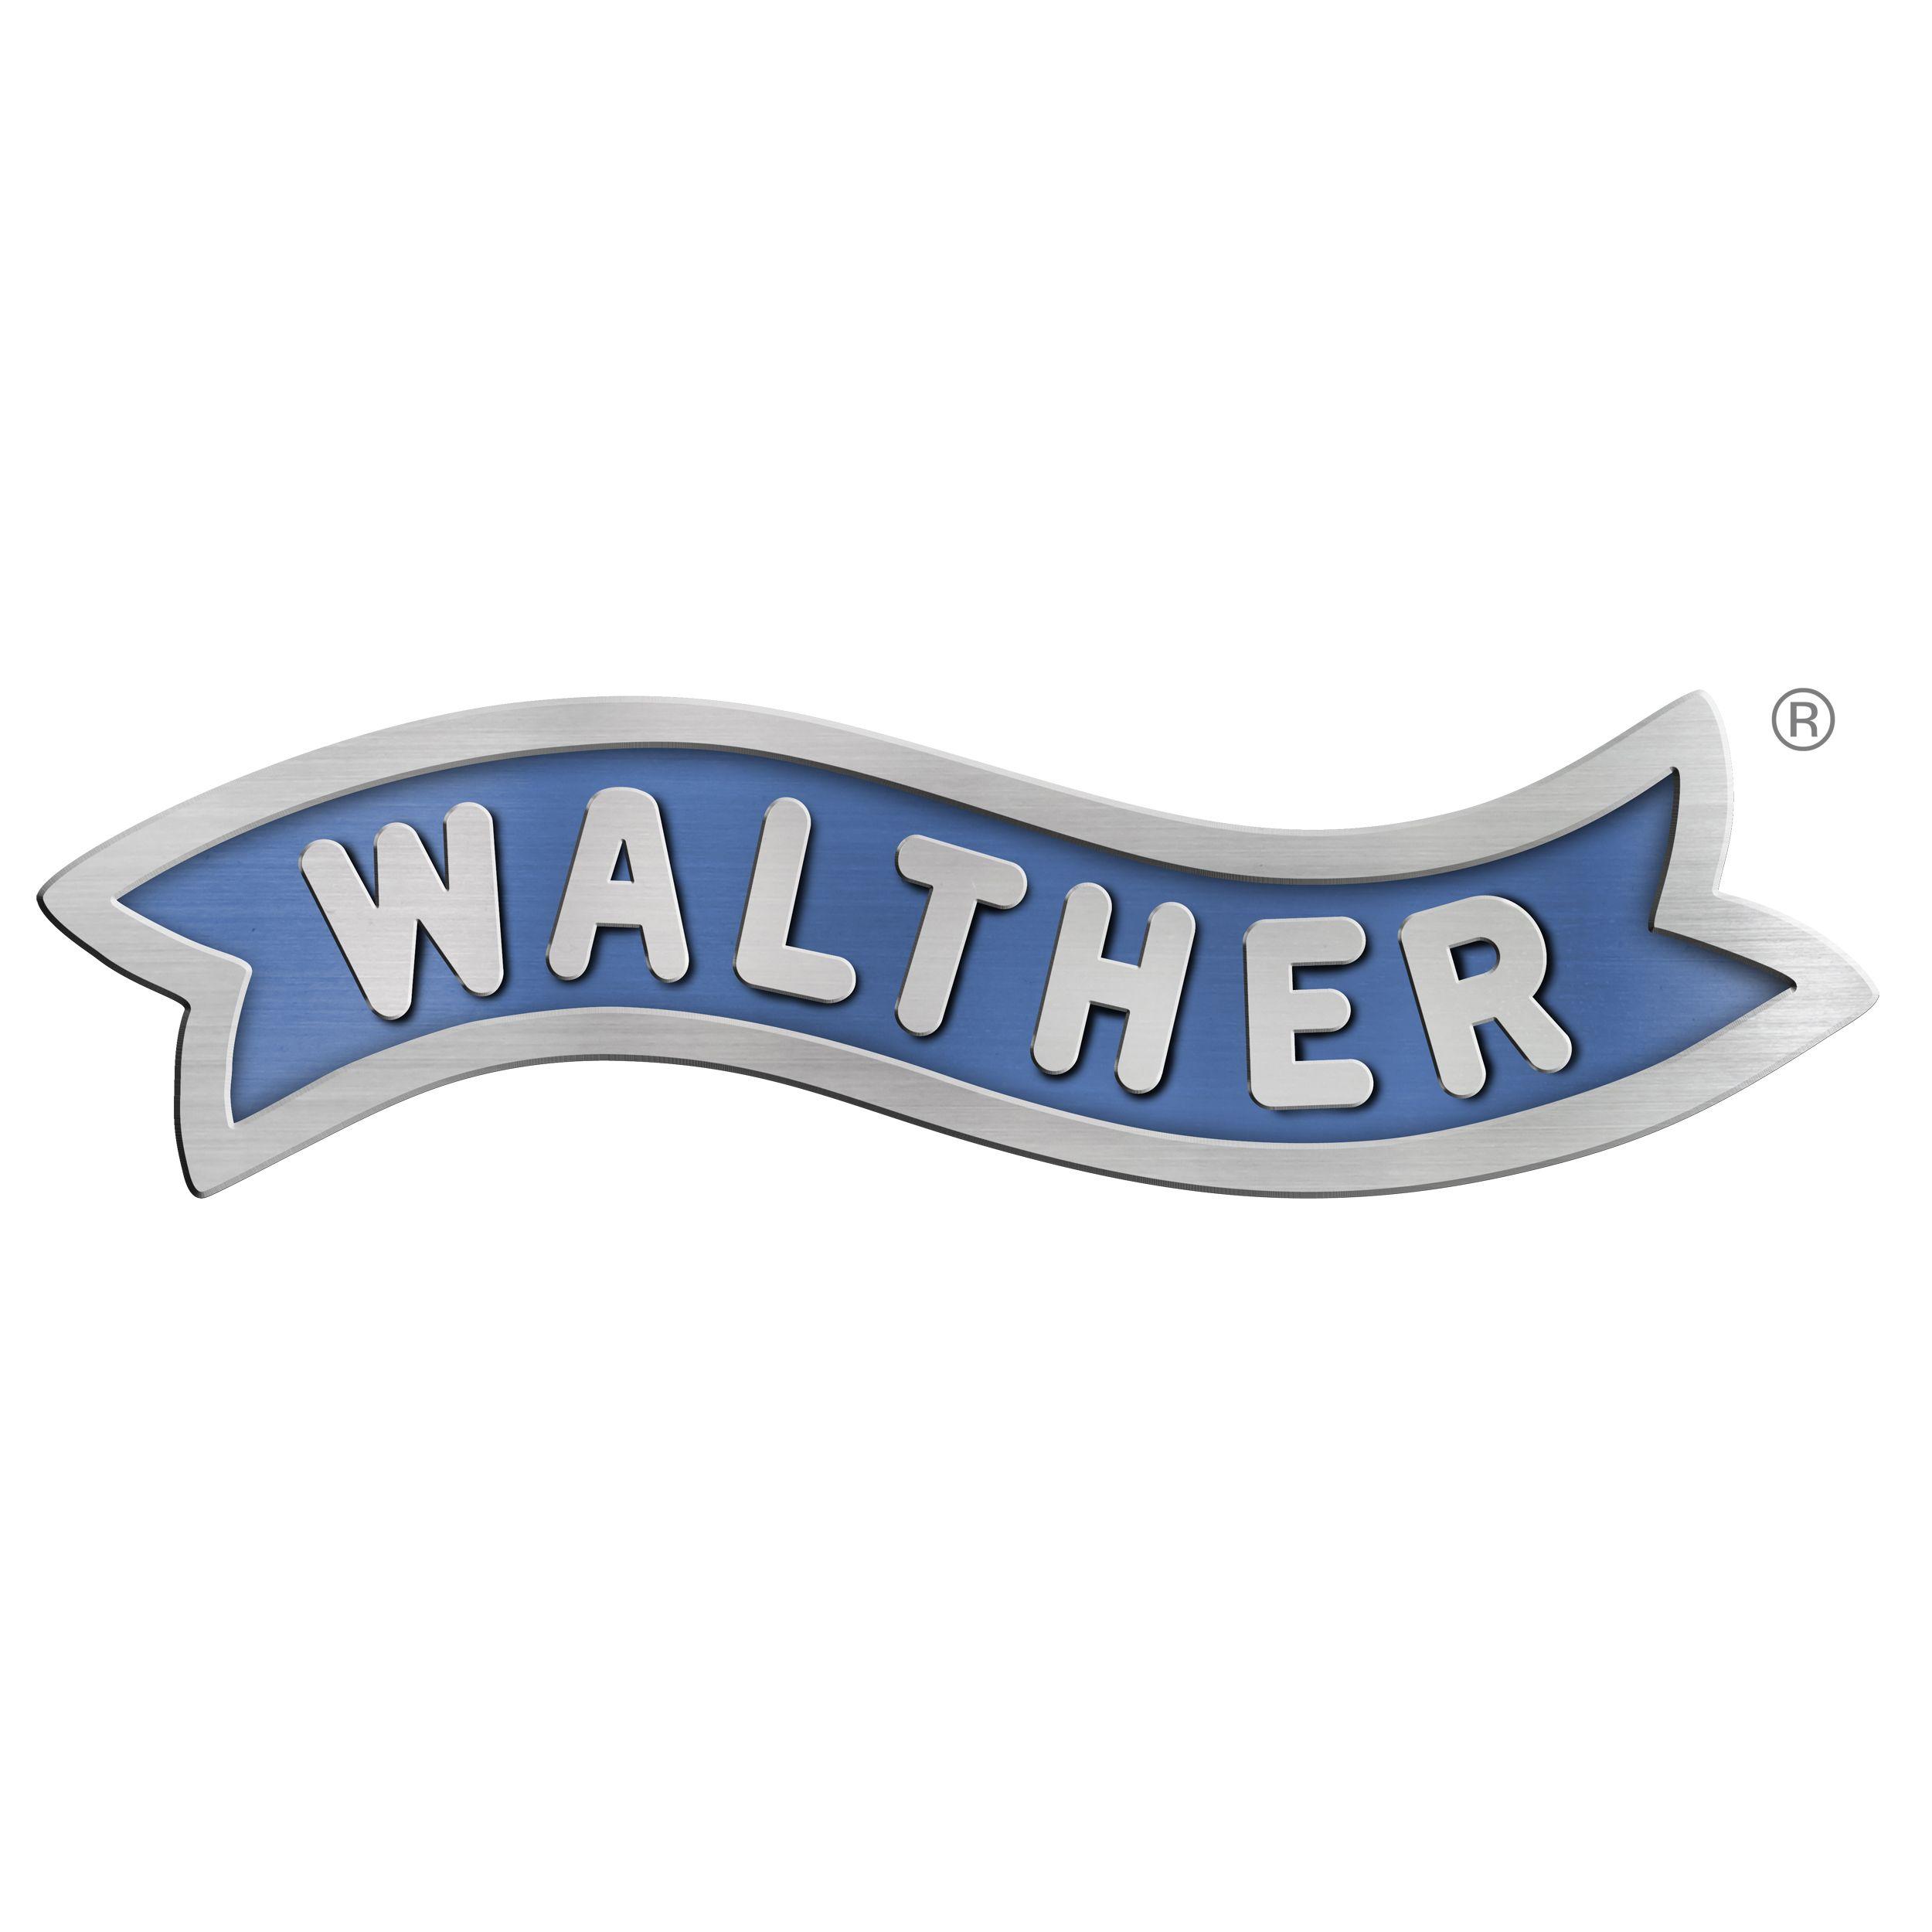 Walther Logo - Tactical Zone Catalog Images